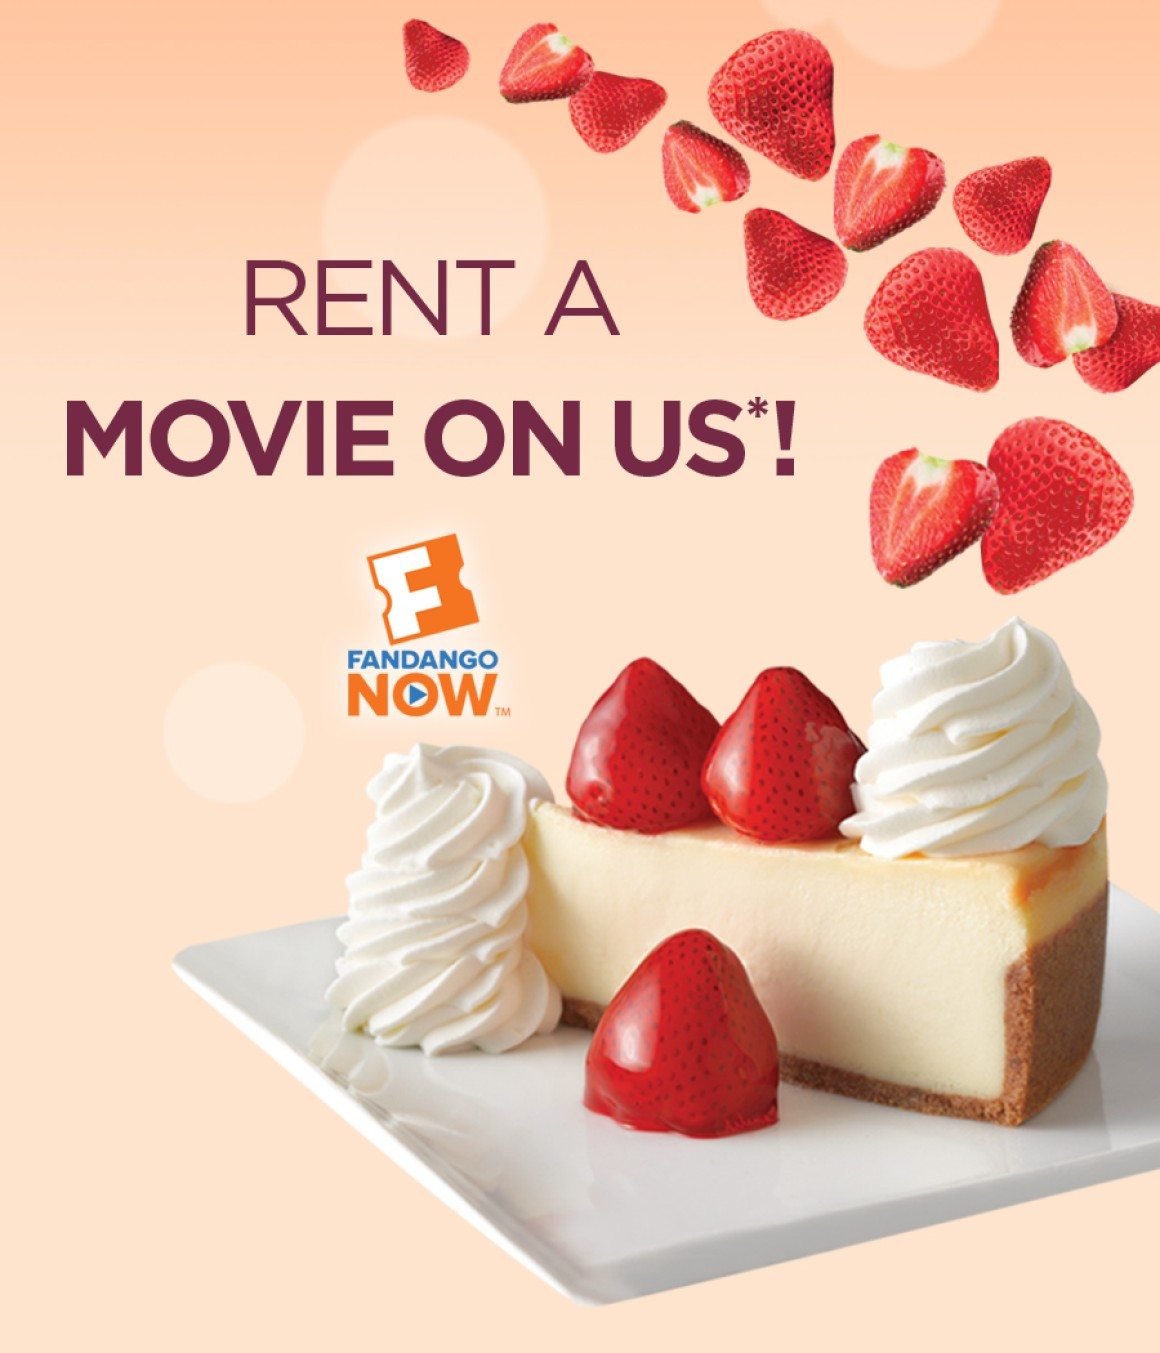 Rent a Movie On Us*